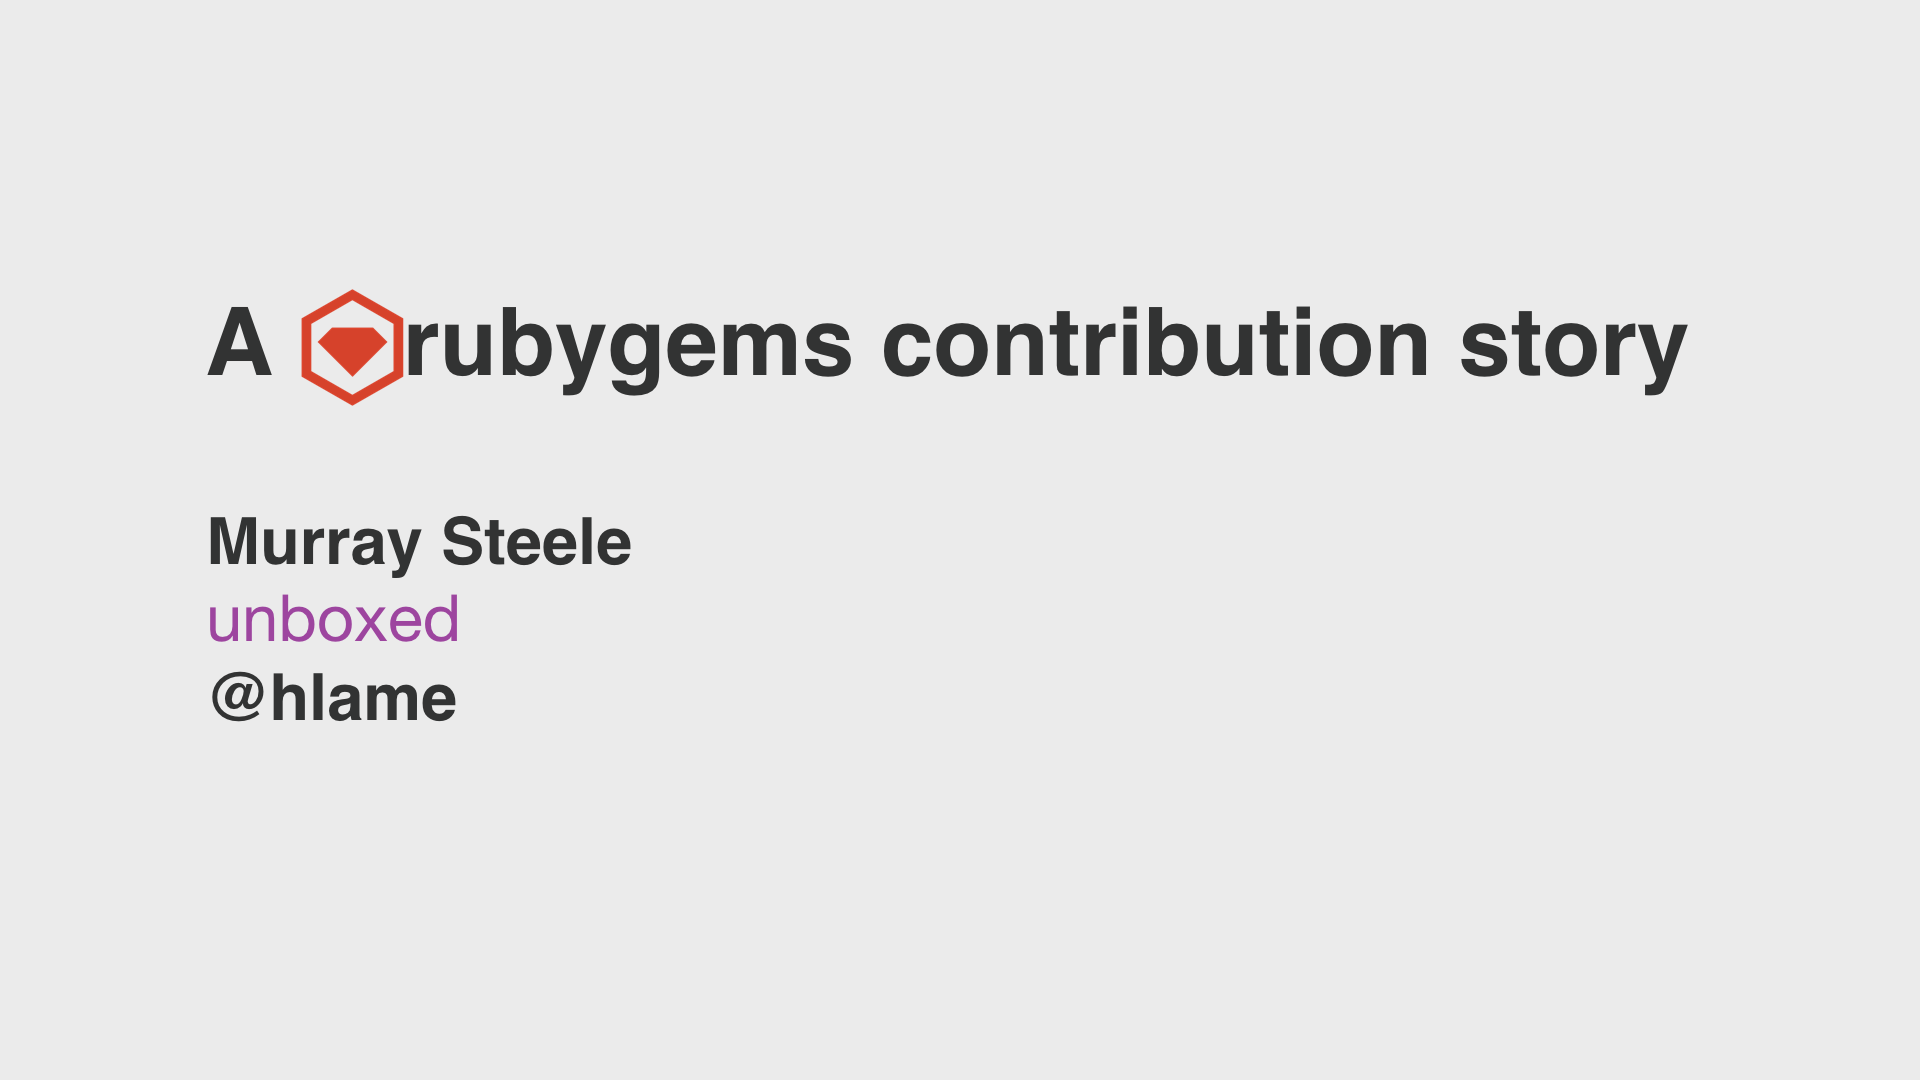 Title slide from my talk “A rubygems contribution story”, text: A rubygems contribution story, Murray Steele, Unboxed, @hlame